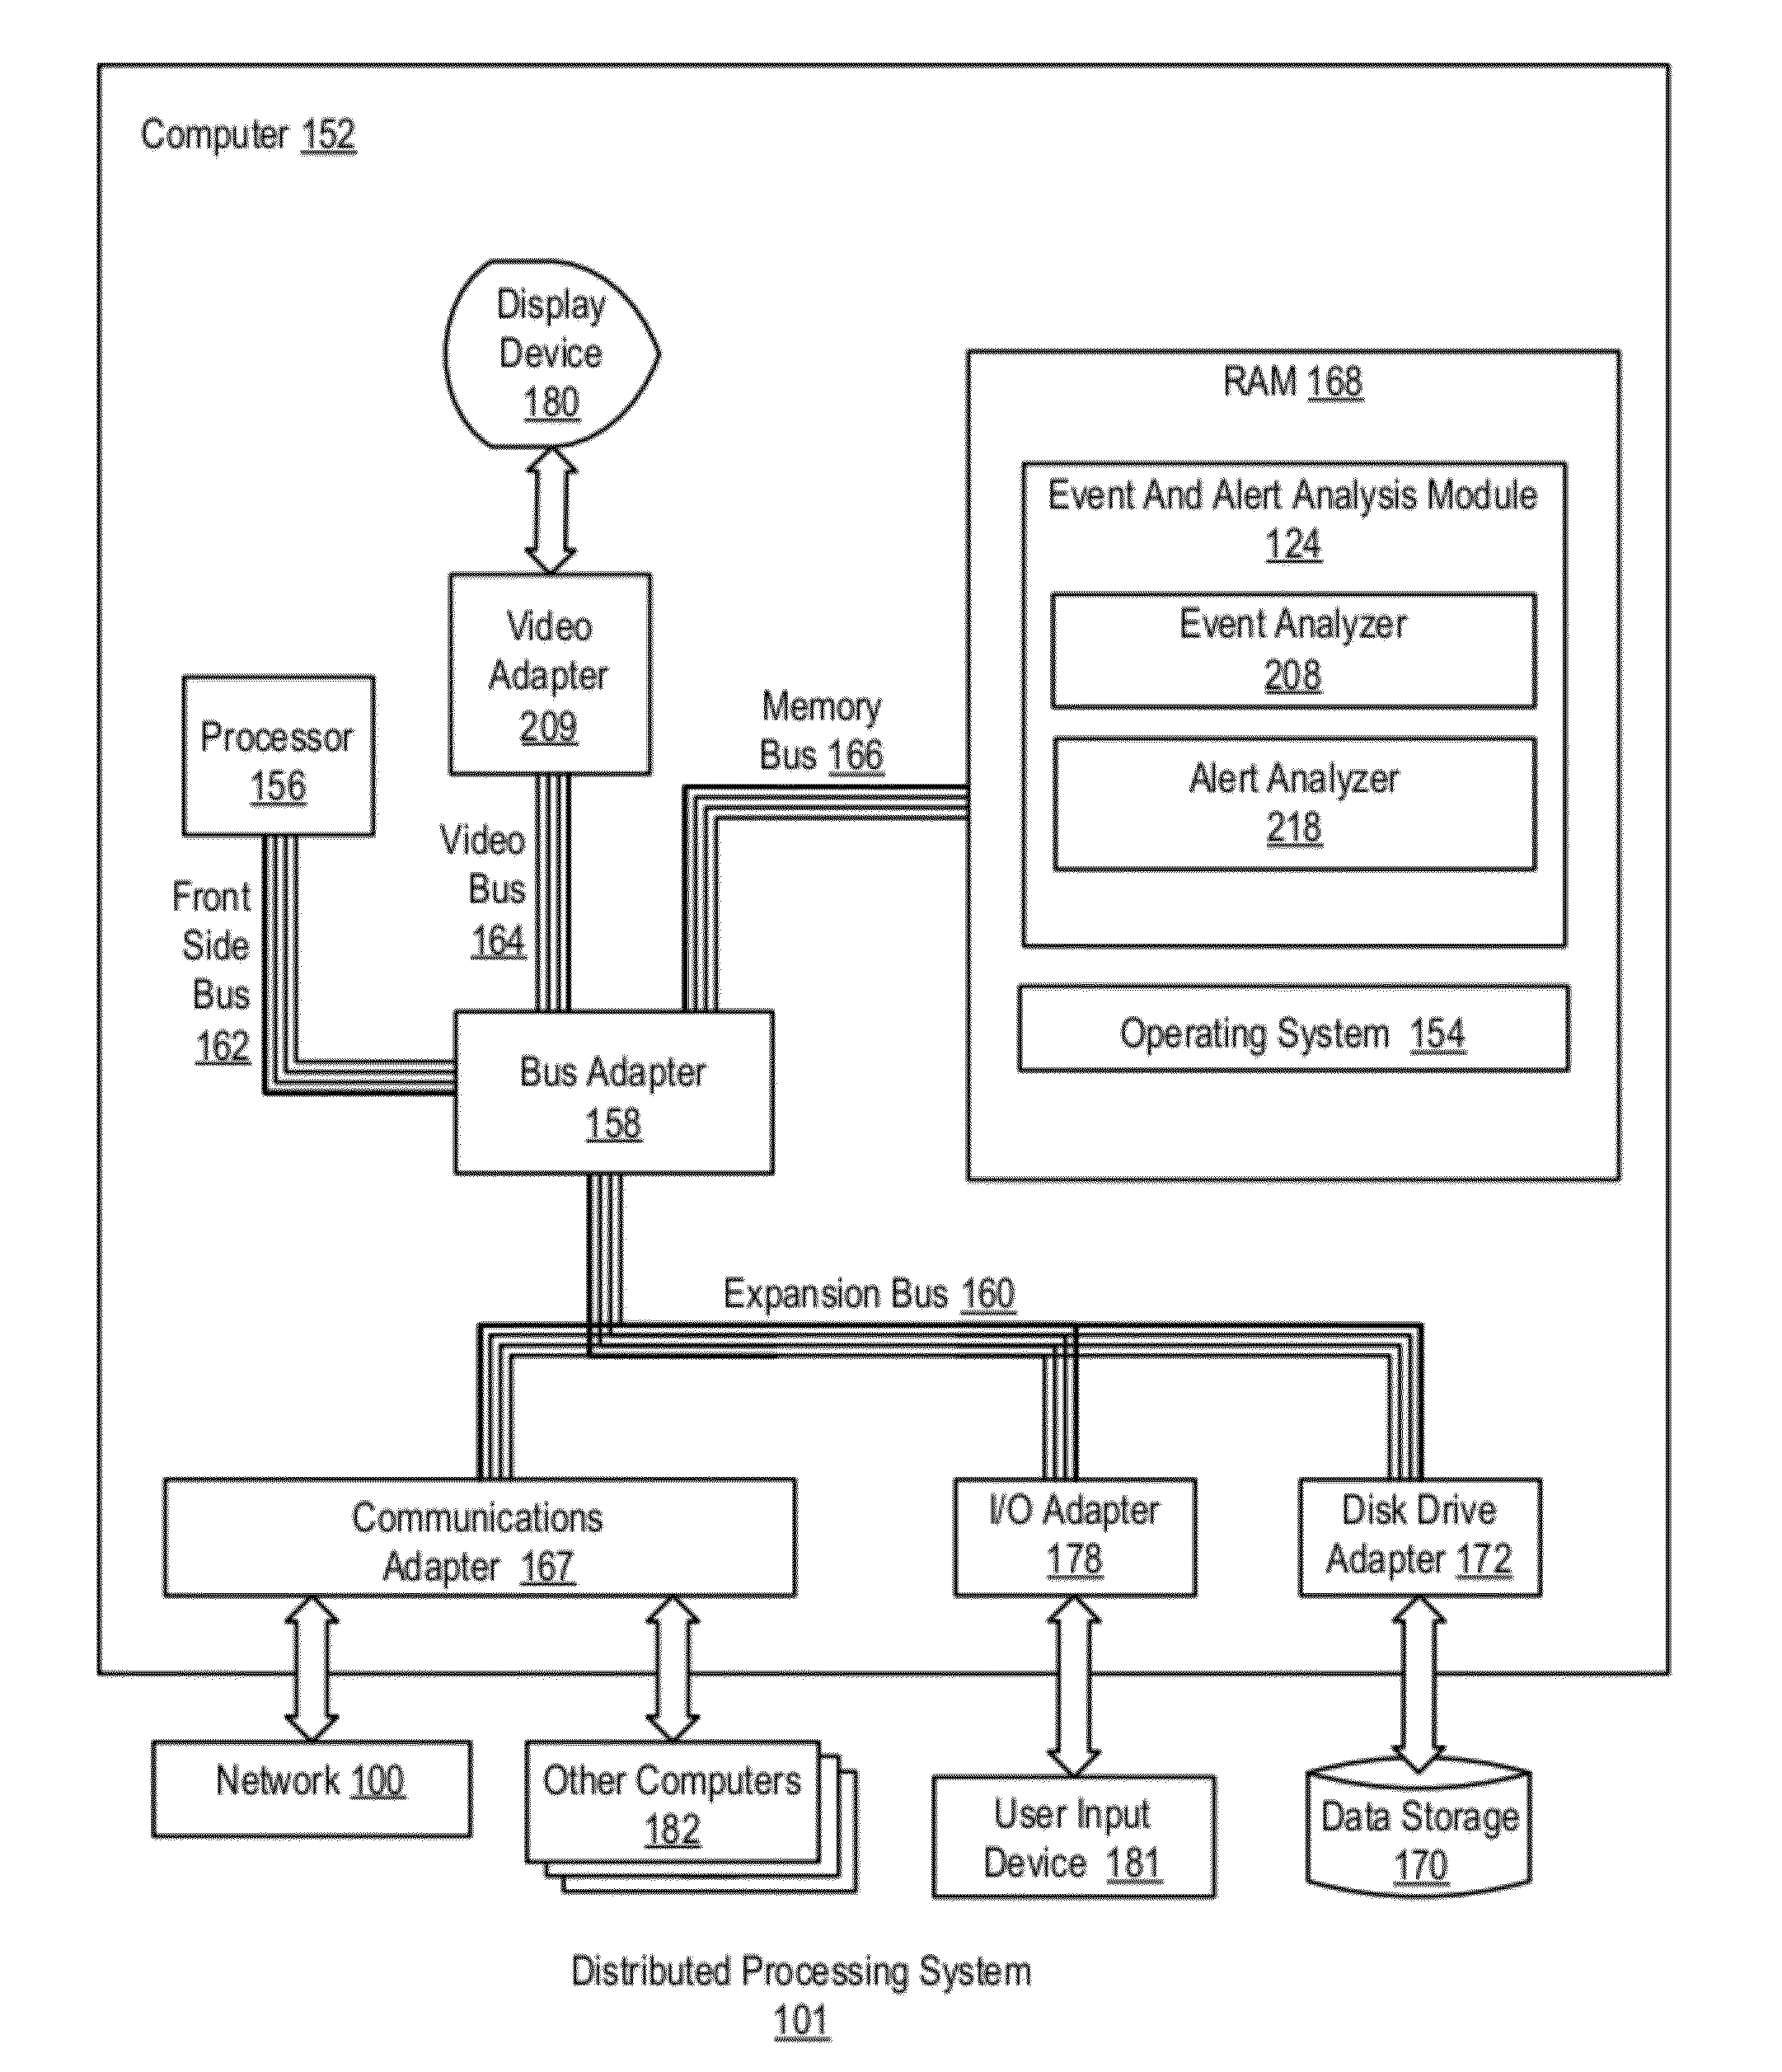 Dynamic Administration Of Component Event Reporting In A Distributed Processing System